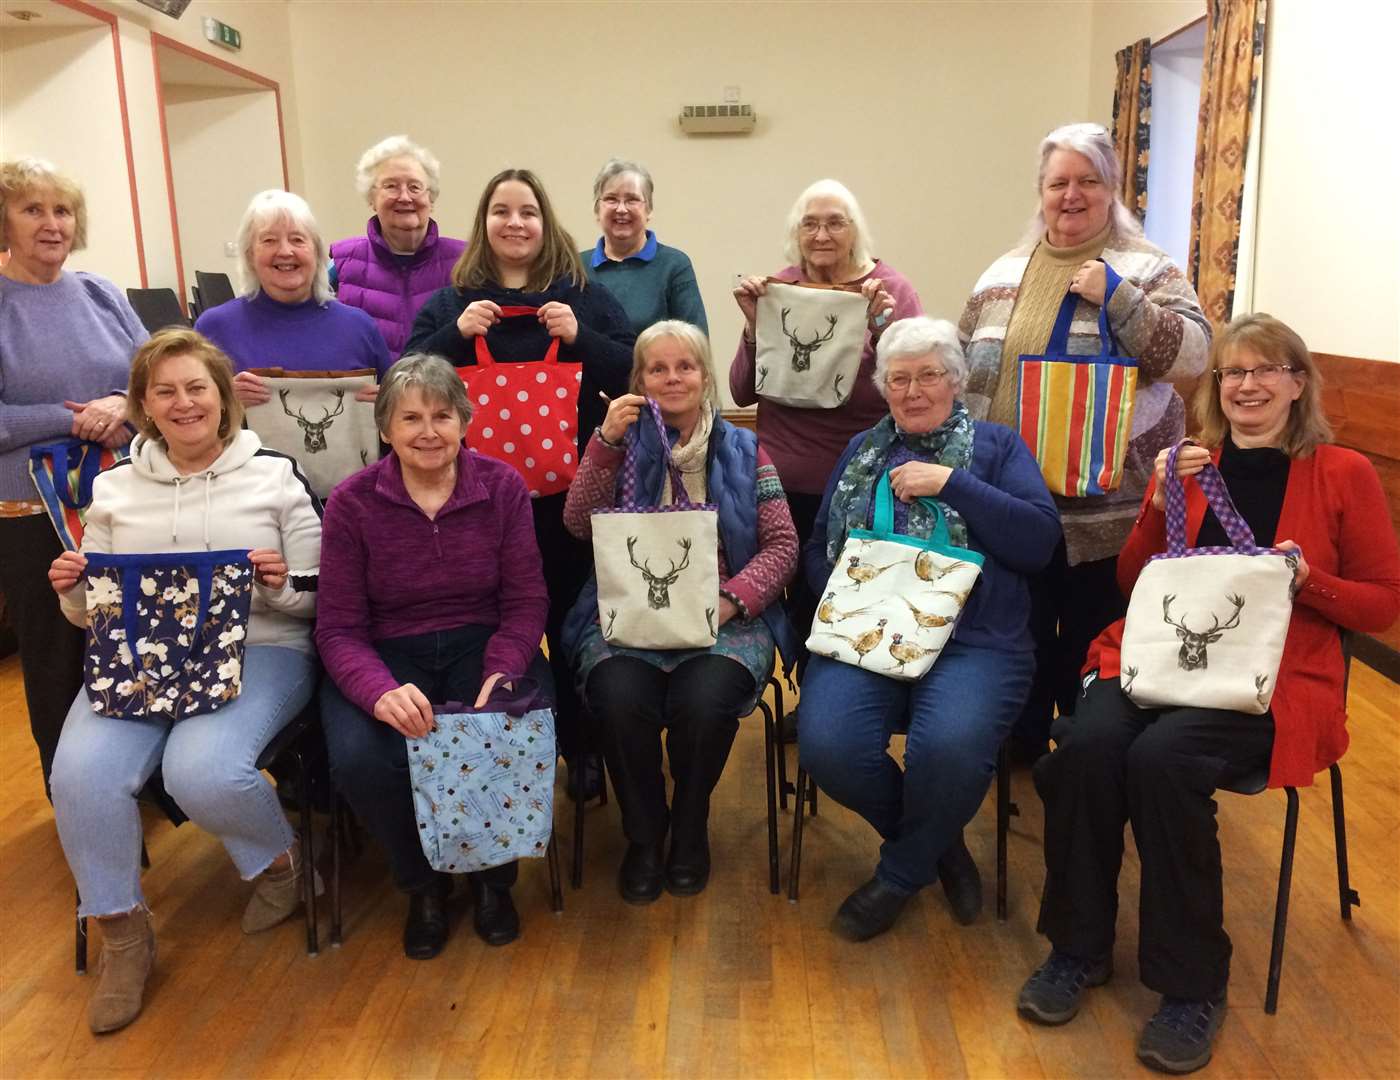 Members of Murkle SWI displaying the tote bags they made at their monthly meeting.